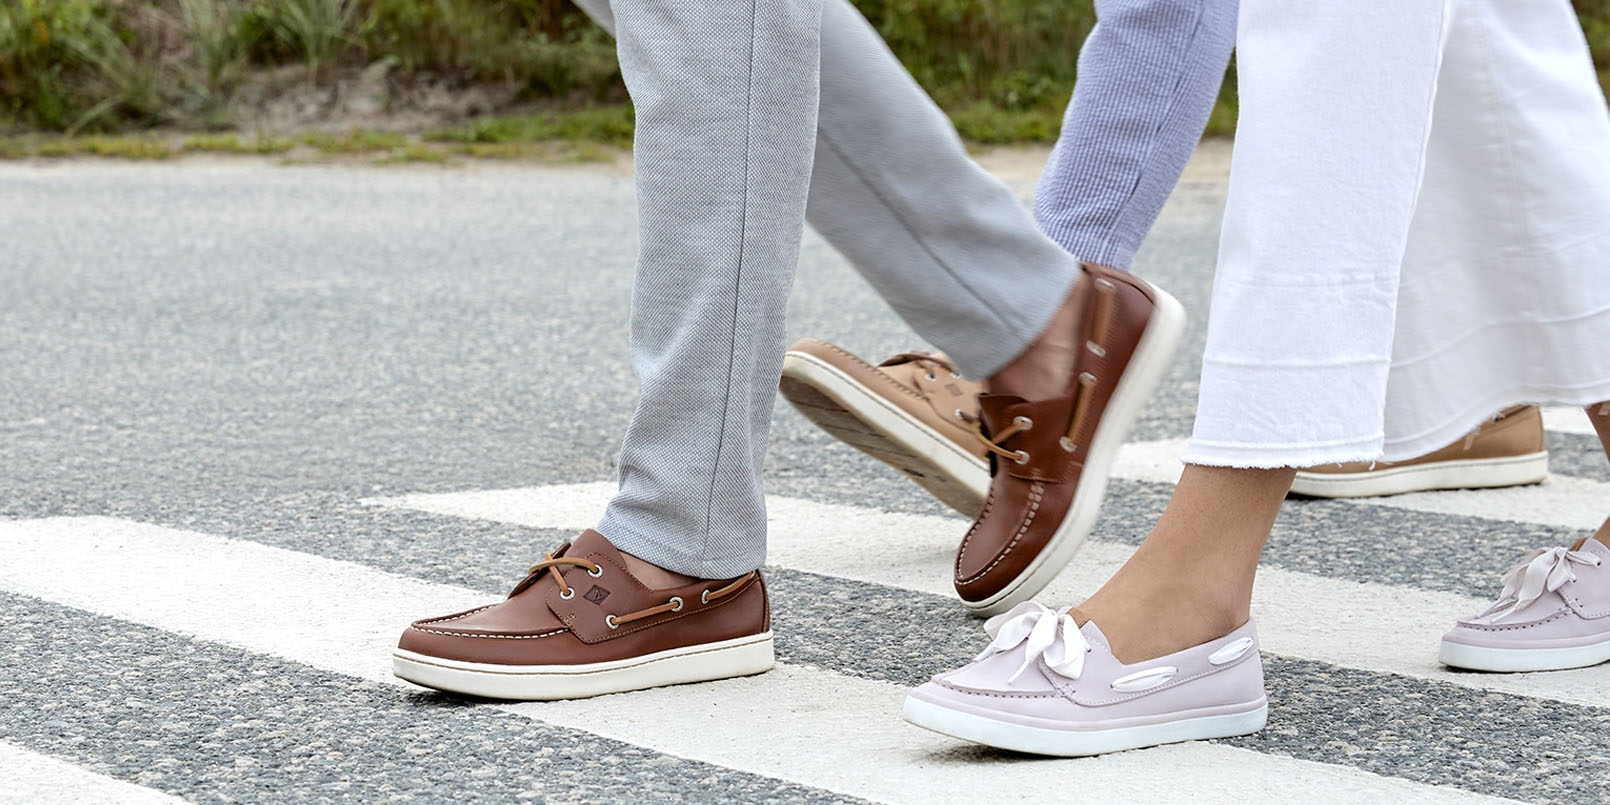 Sperry Outlet's Spring Sale offers 